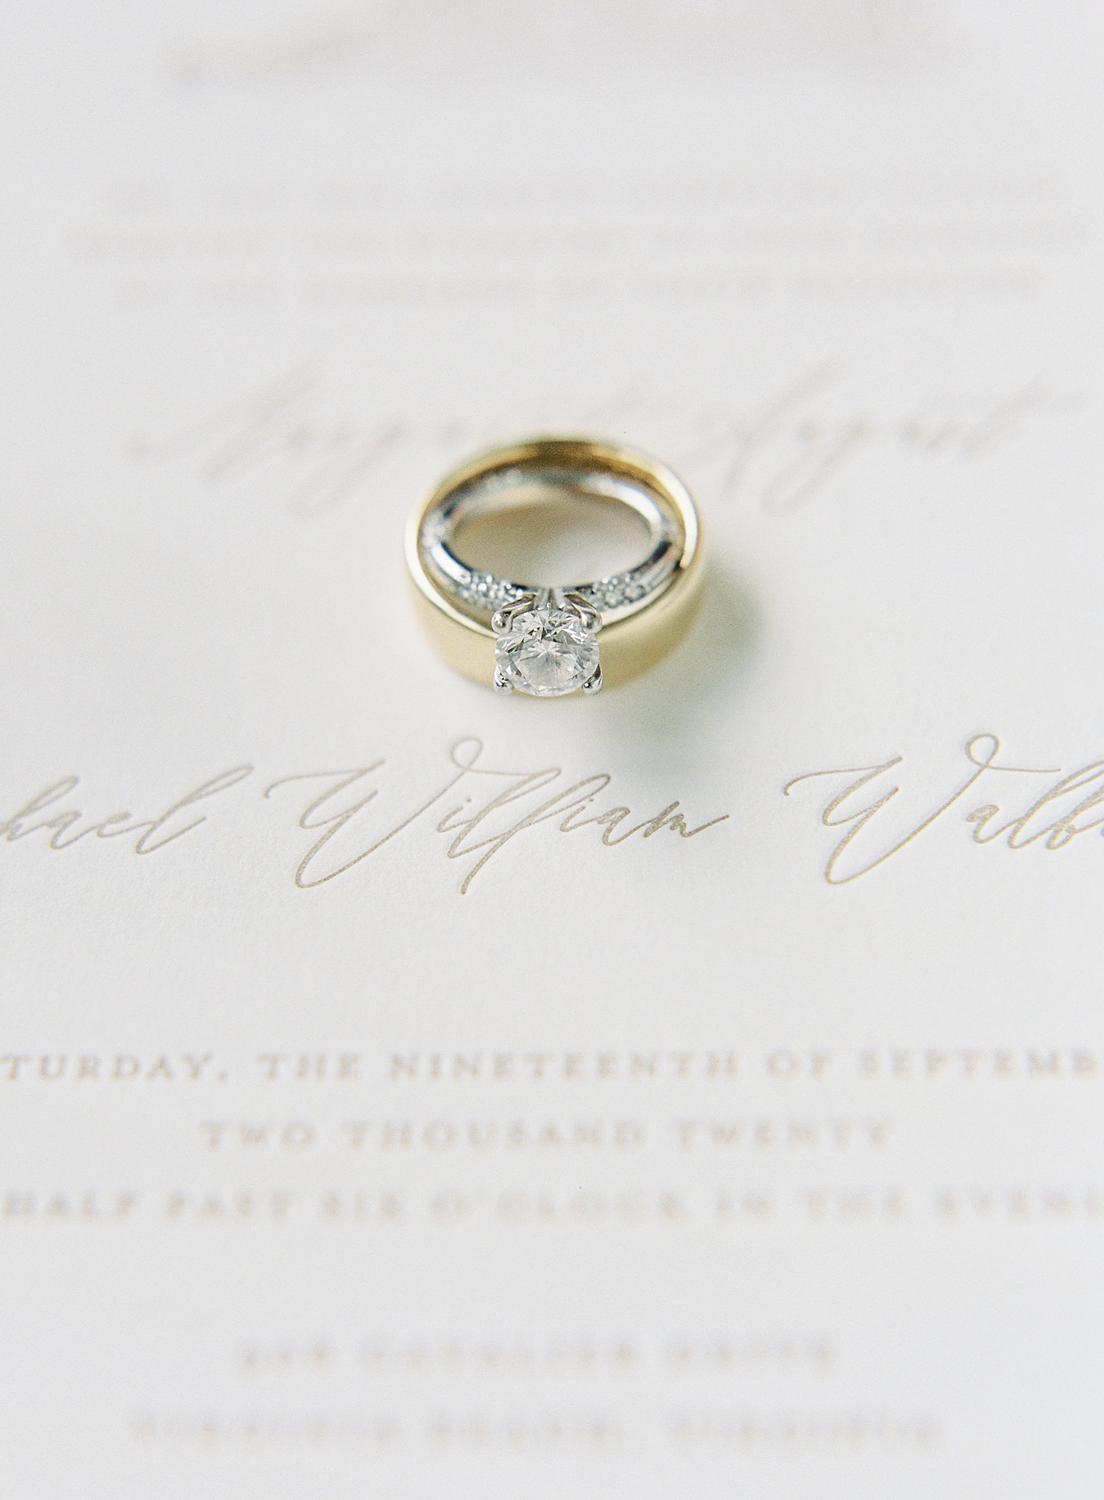 detail images of invitation suite and ring for bride's intimate home wedding